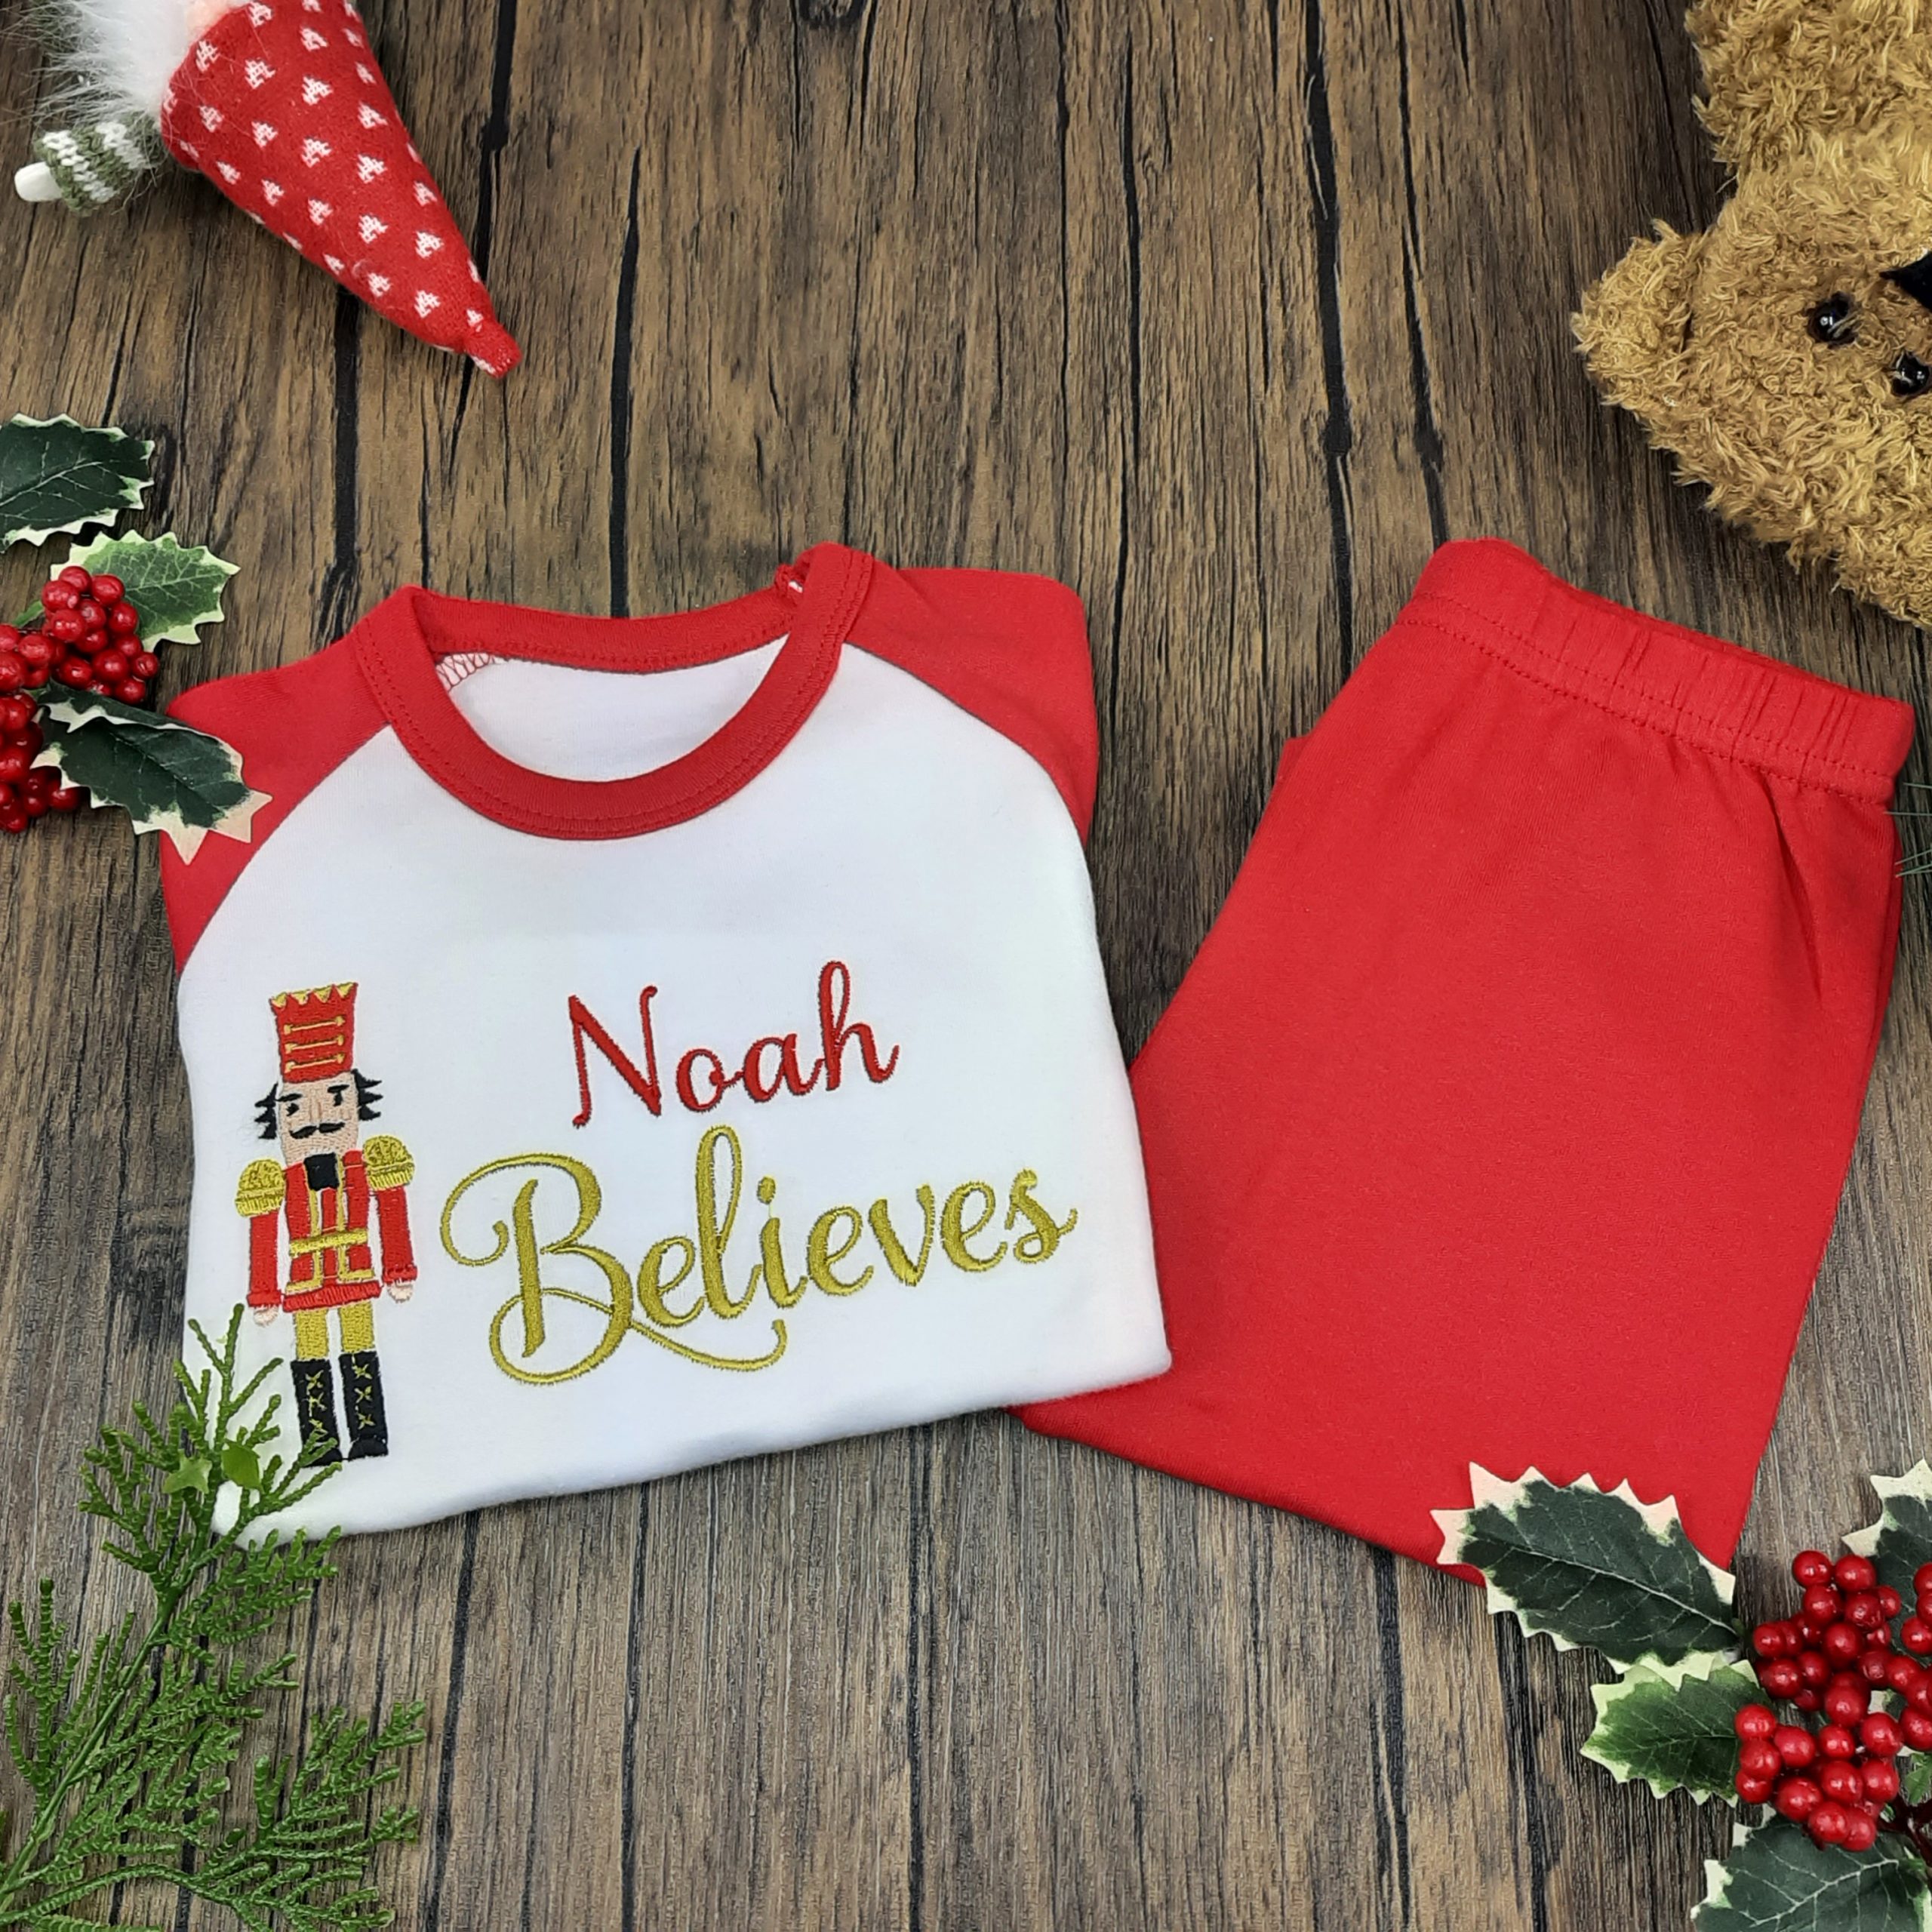 Nutcracker Christmas PJs in red and white for children with embroidered personalisation. Believes design. laid out